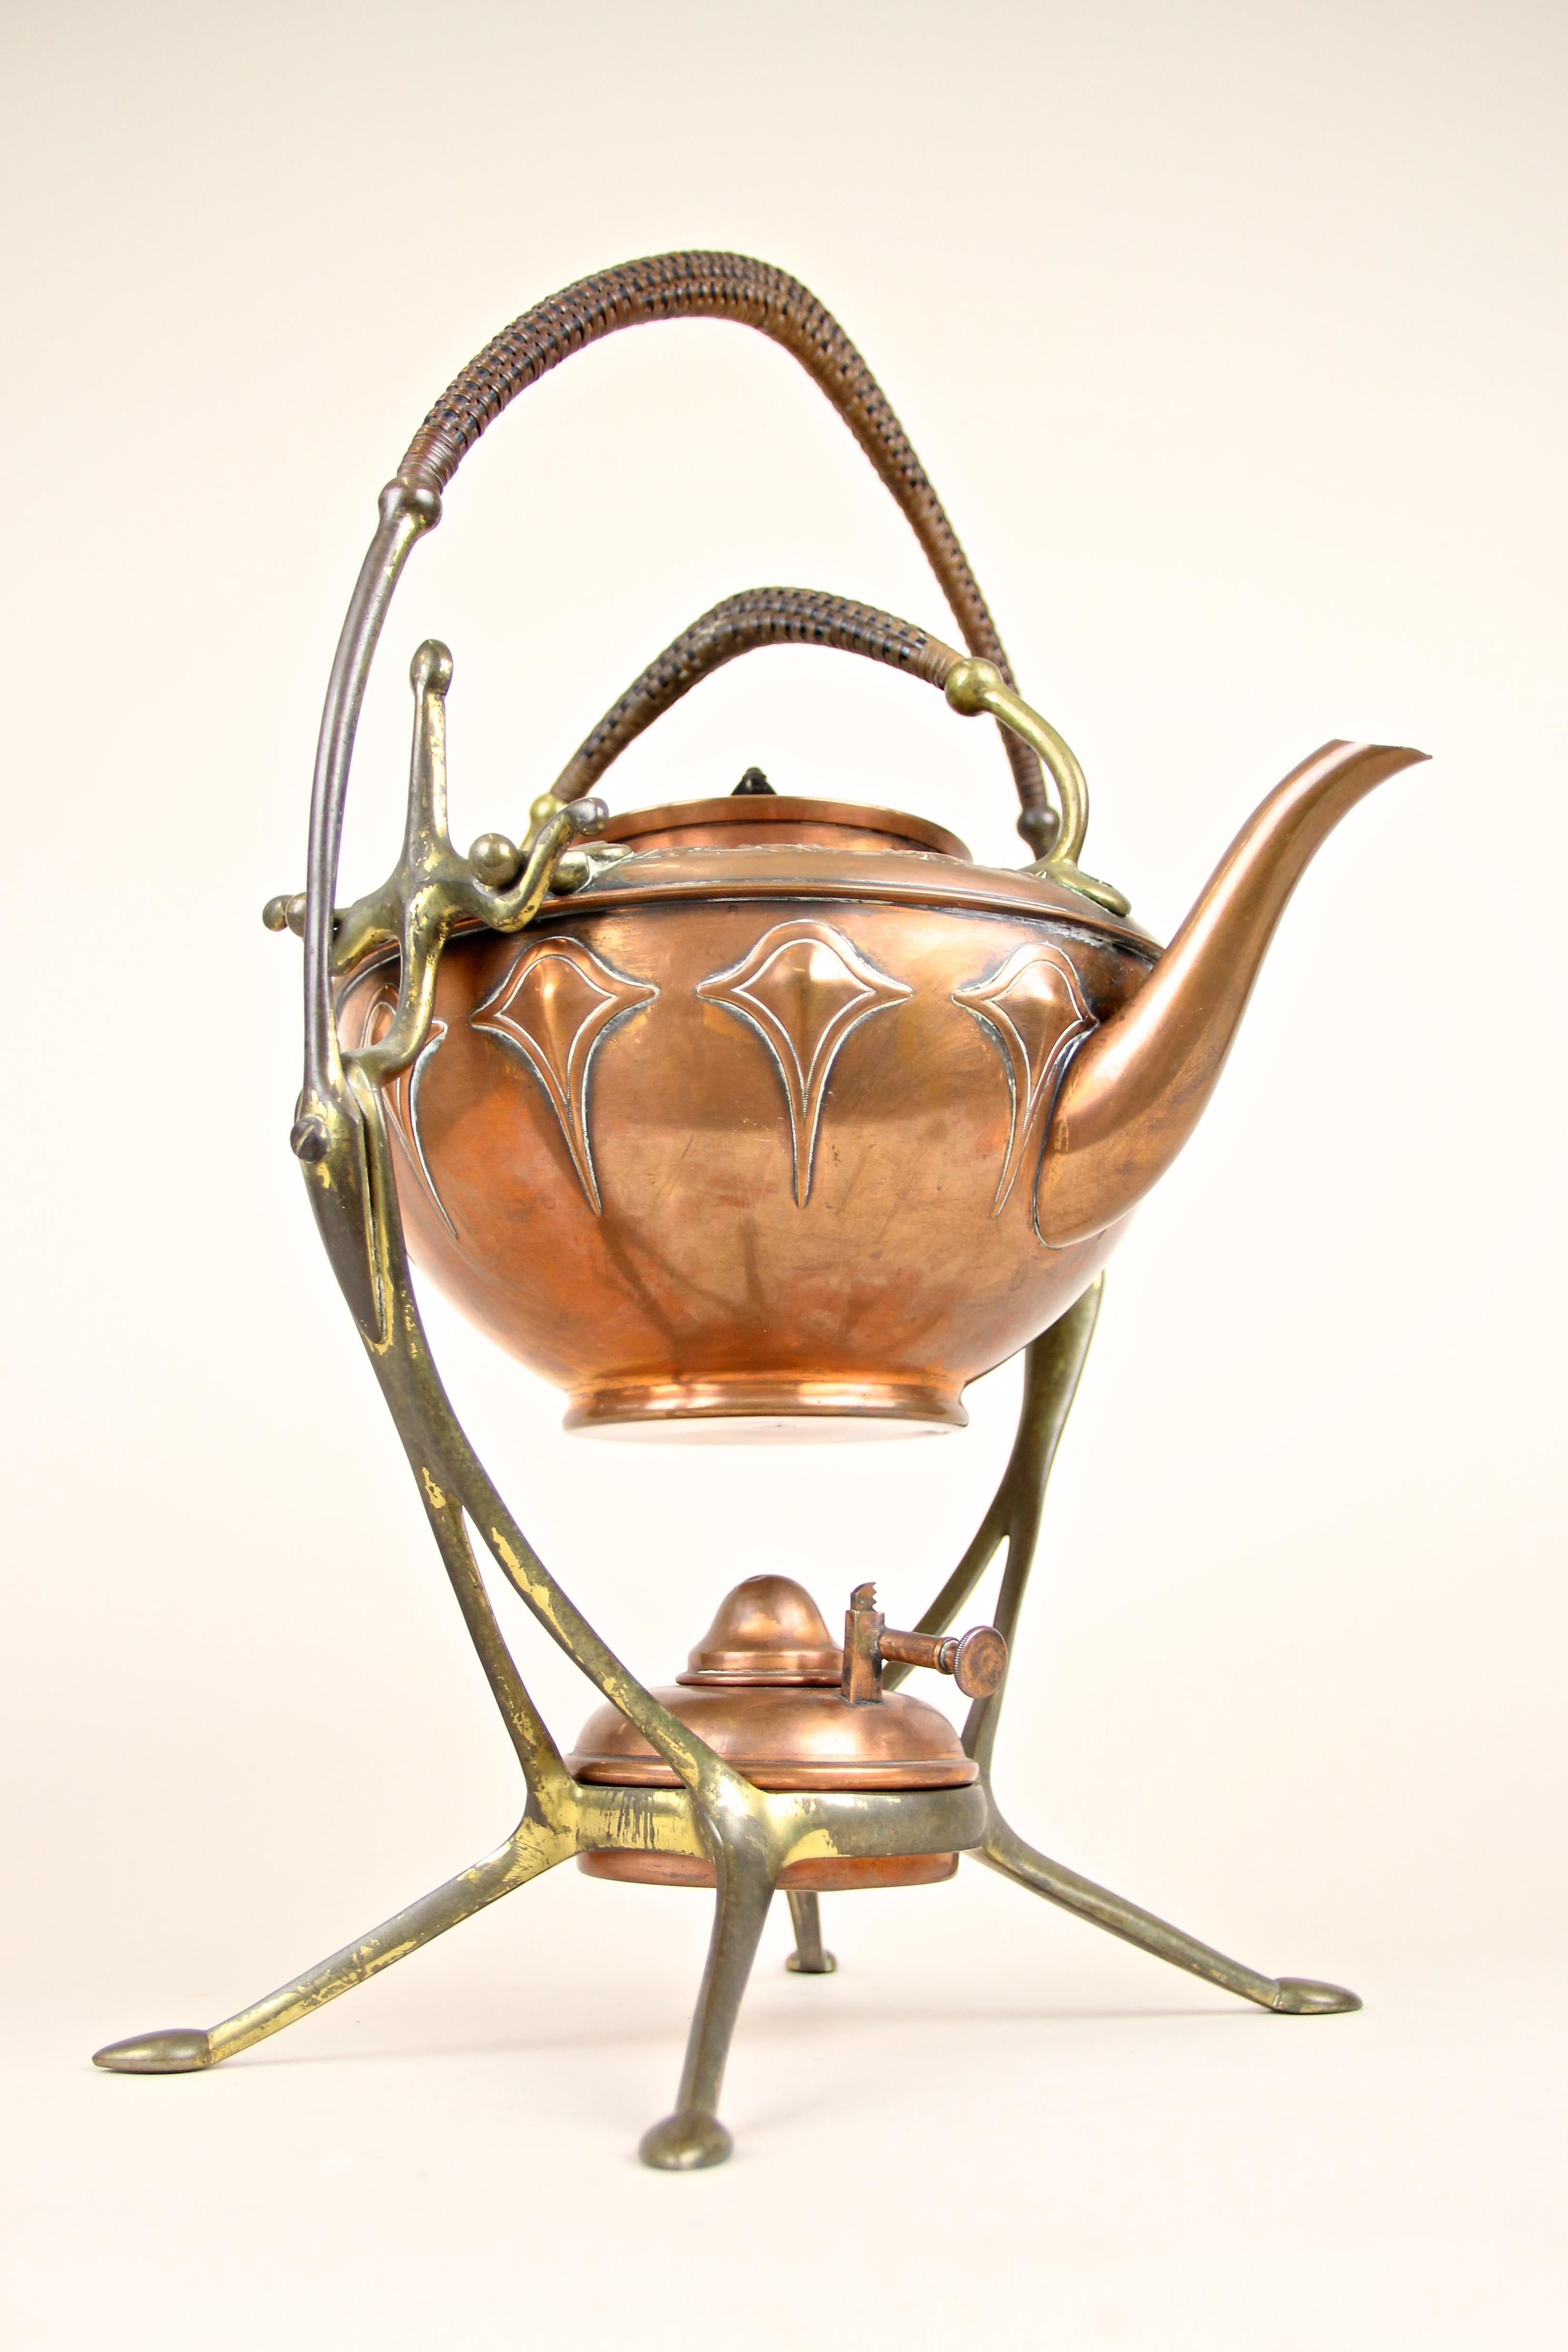 20th Century Art Deco Tea Set by WMF, Copper-Plated, Germany, circa 1920 2